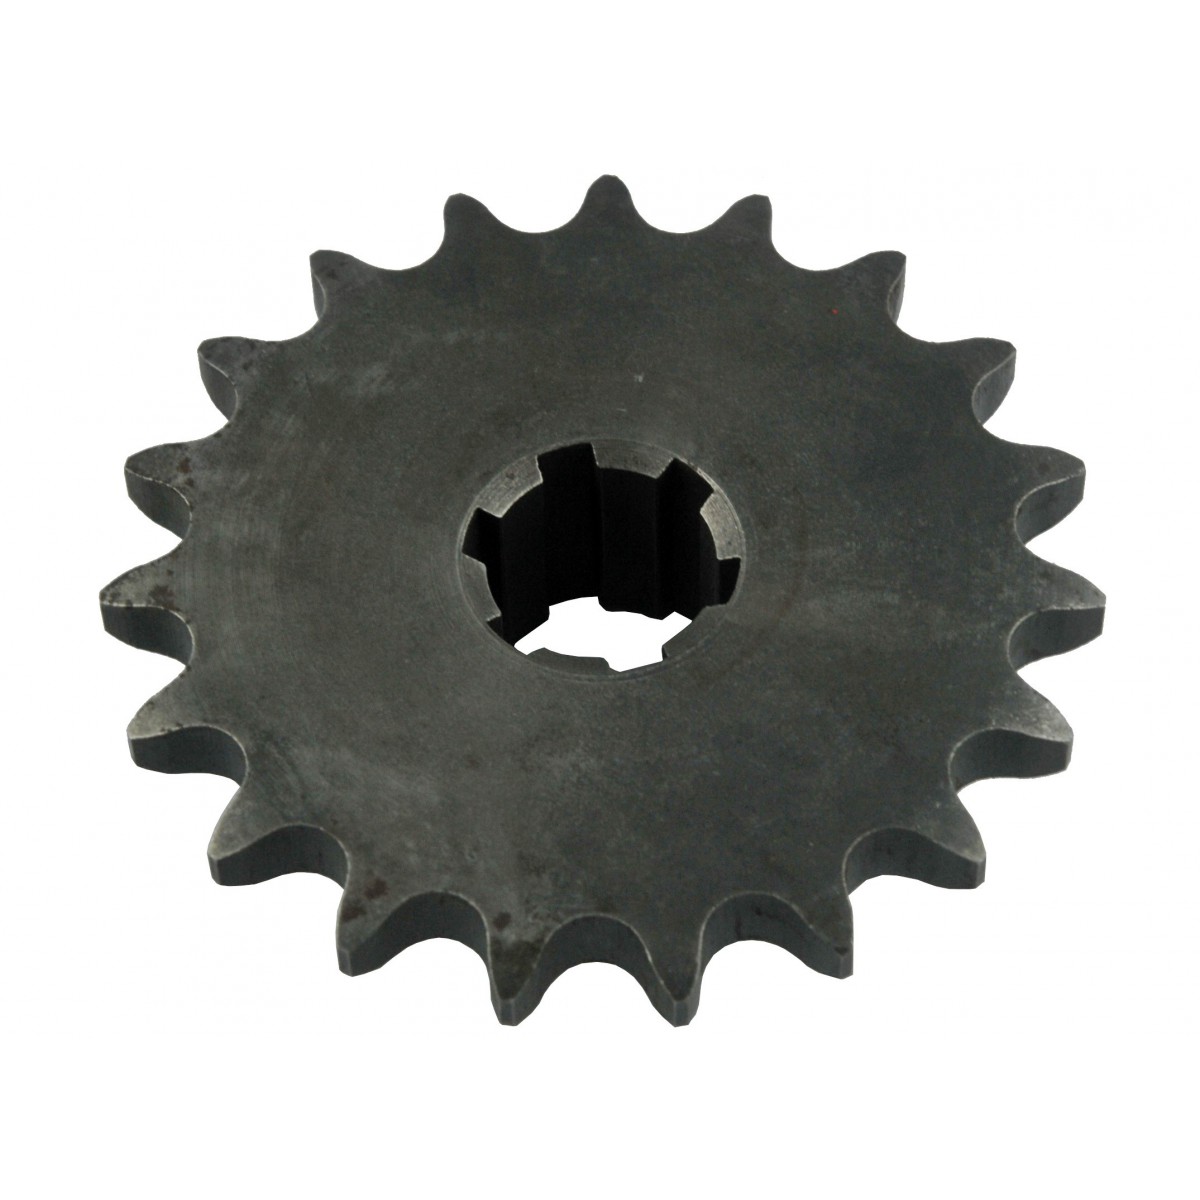 Big gear wheel for SB and other rotary tillers - big gear